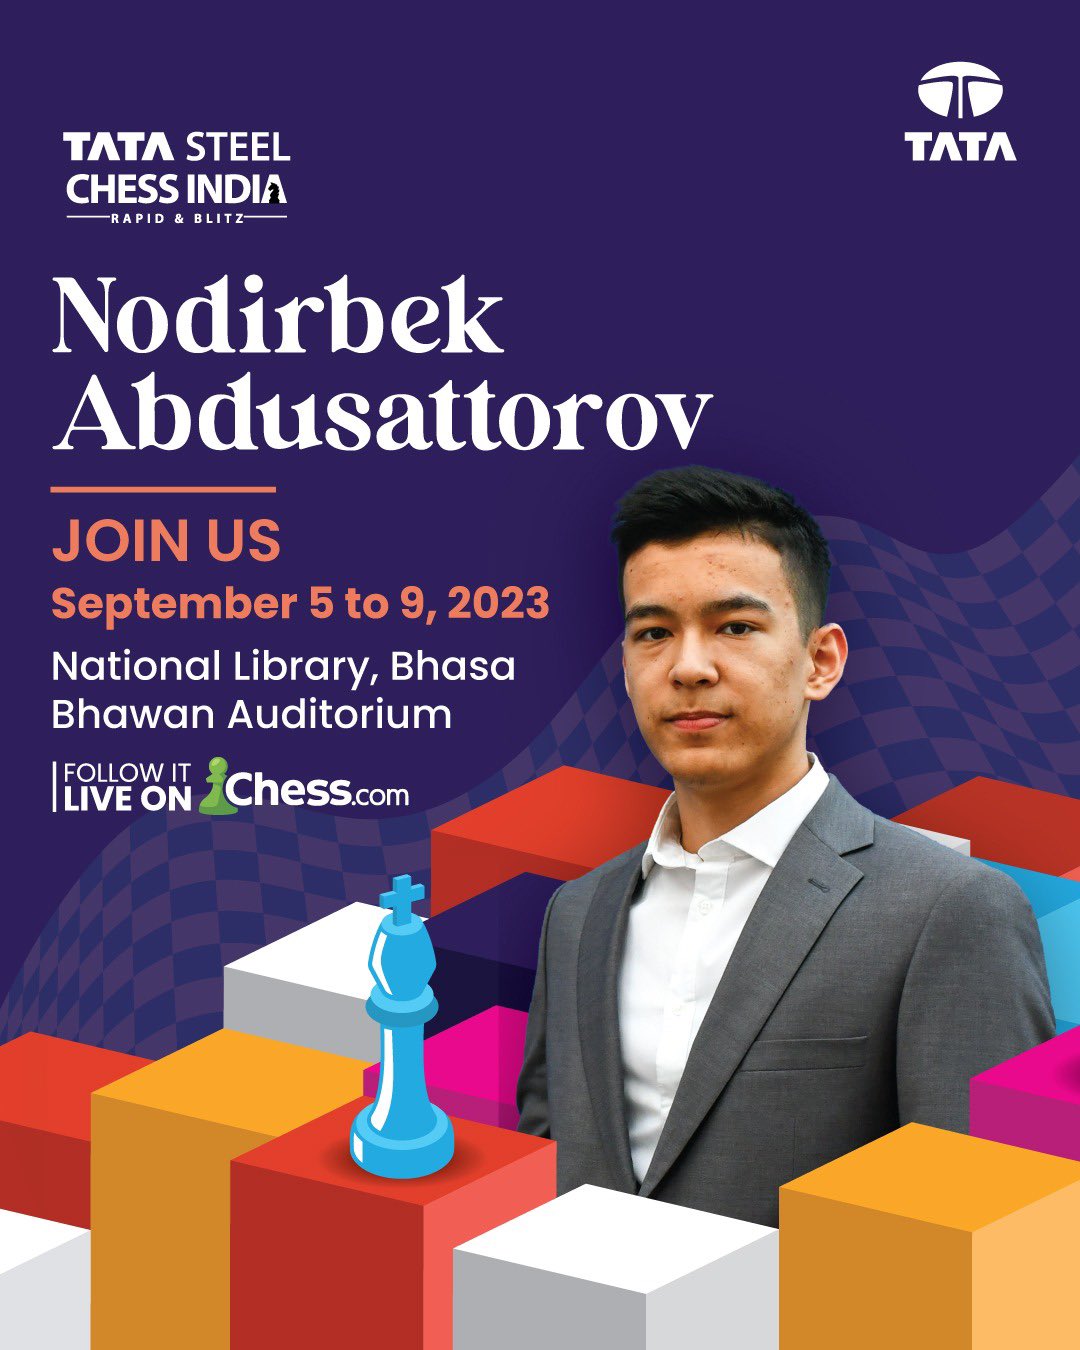 Tata Steel Chess India on X: We're thrilled to announce the dates